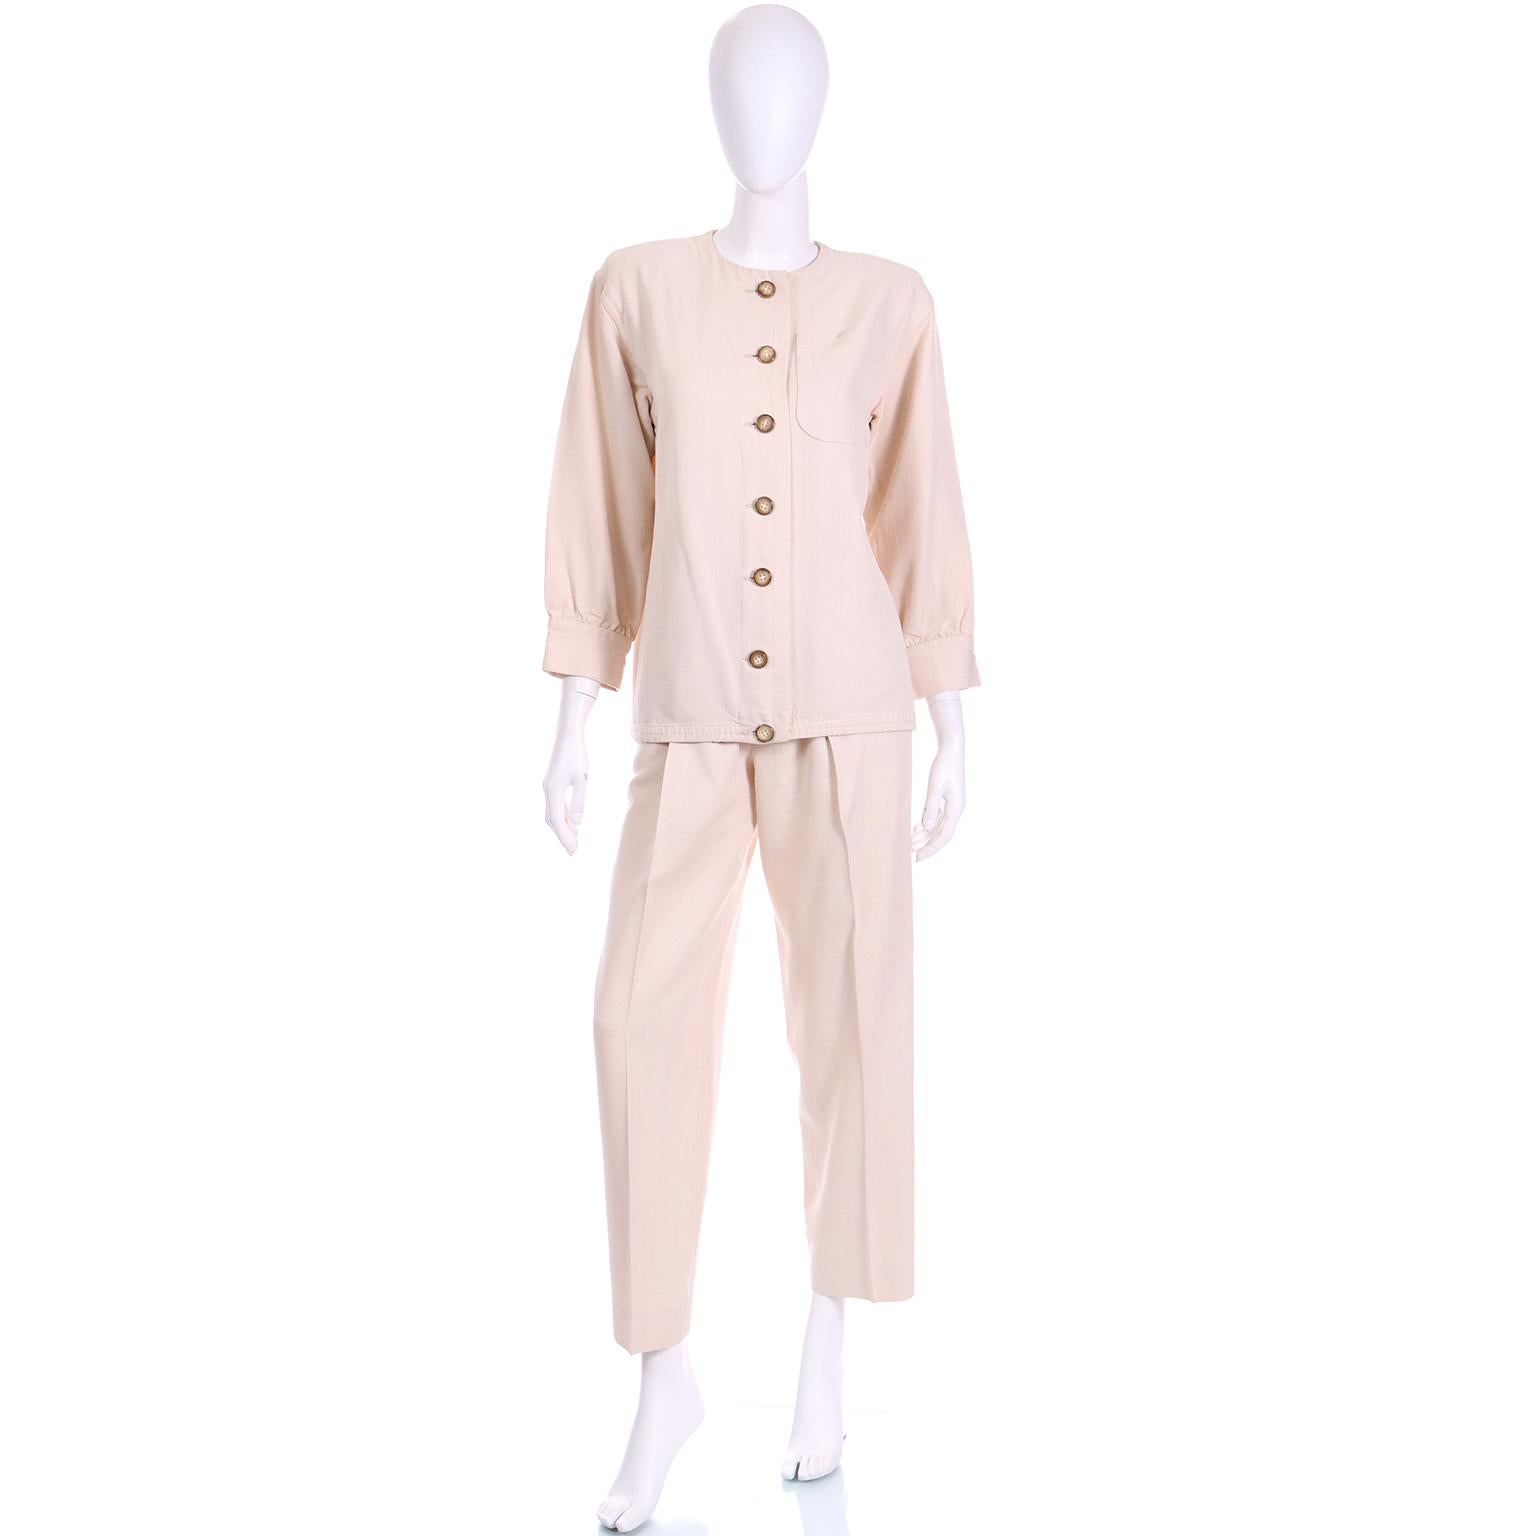 This vintage Yves Saint Laurent neutral pantsuit from the late 1970s or early 1980s exemplifies YSL's enduring commitment to theme elements in his designs. A reinterpretation of the classic safari look, this ensemble comprises a tan jacket with